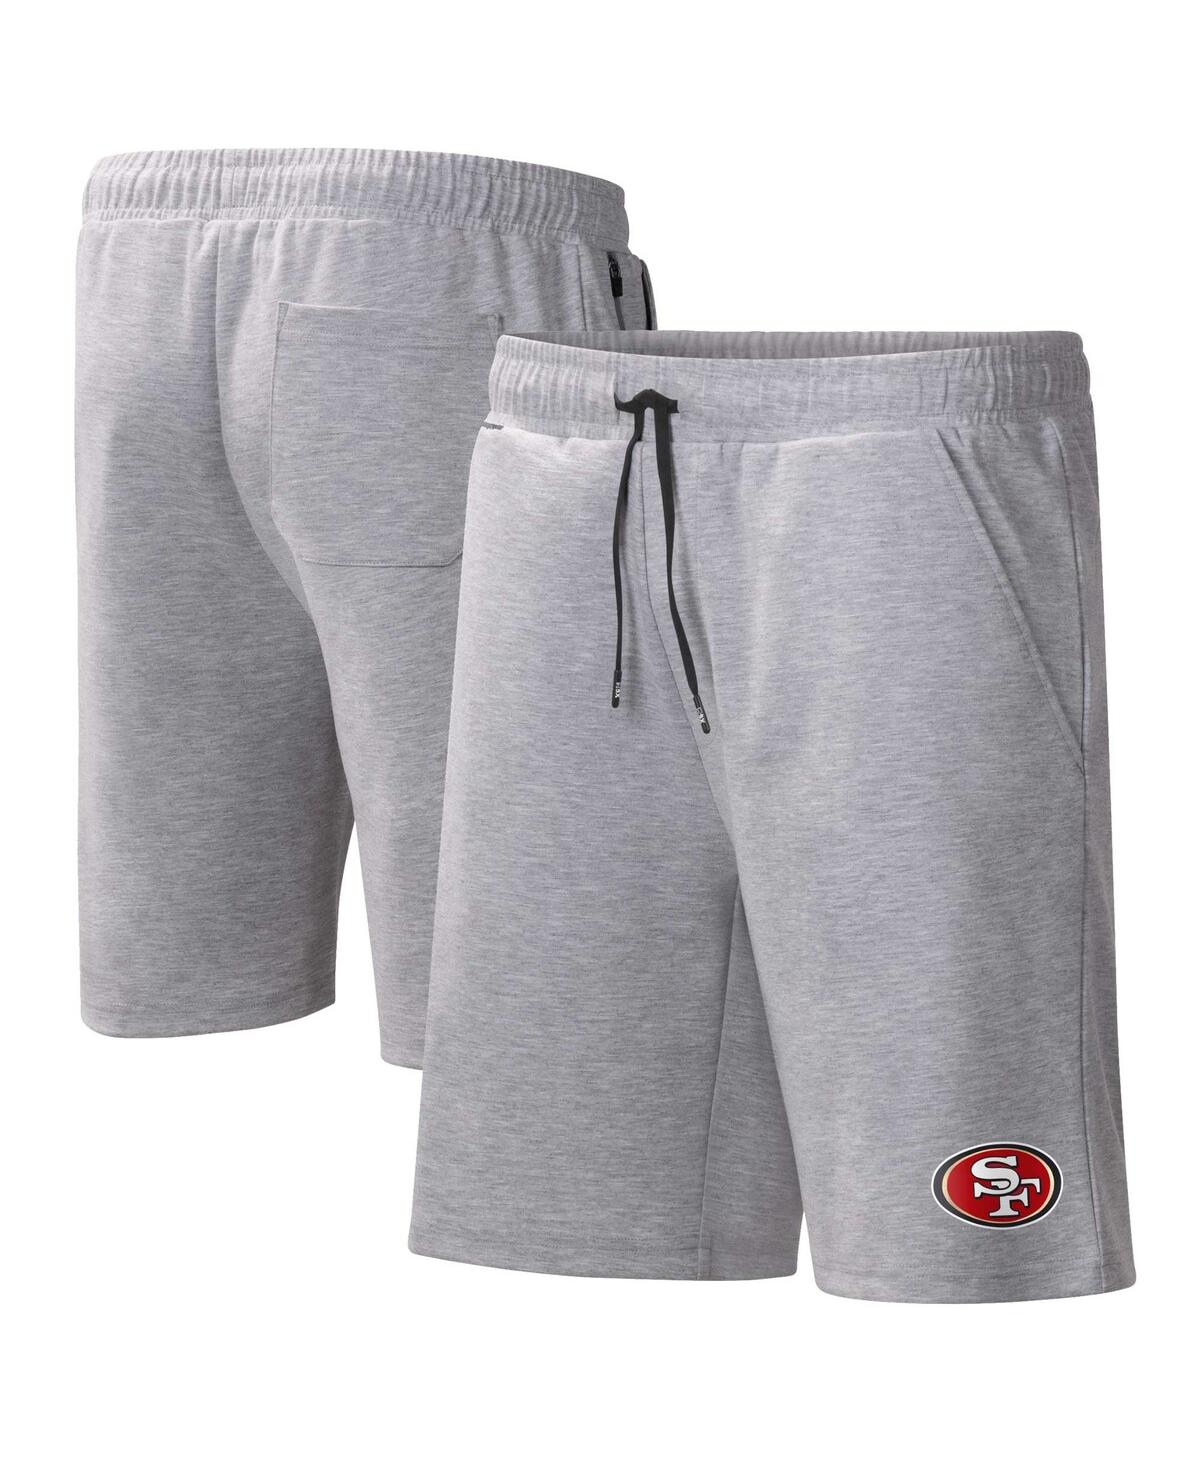 Men's Msx by Michael Strahan Heather Gray San Francisco 49ers Trainer Shorts - Heather Gray